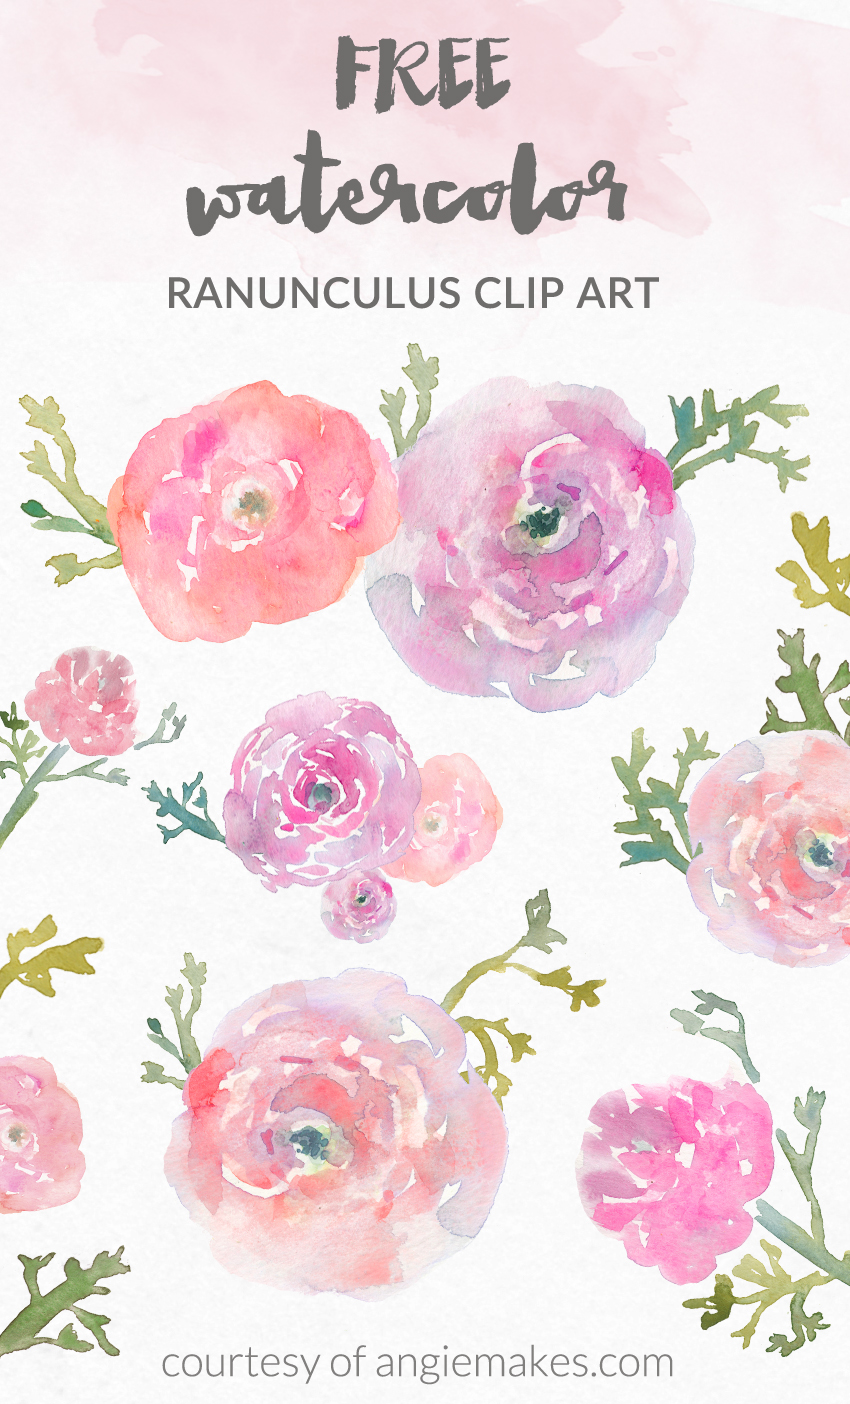 Free Watercolor Flower Clip Art - Watercolor Ranunculus by Angie Makes | angiemakes.com